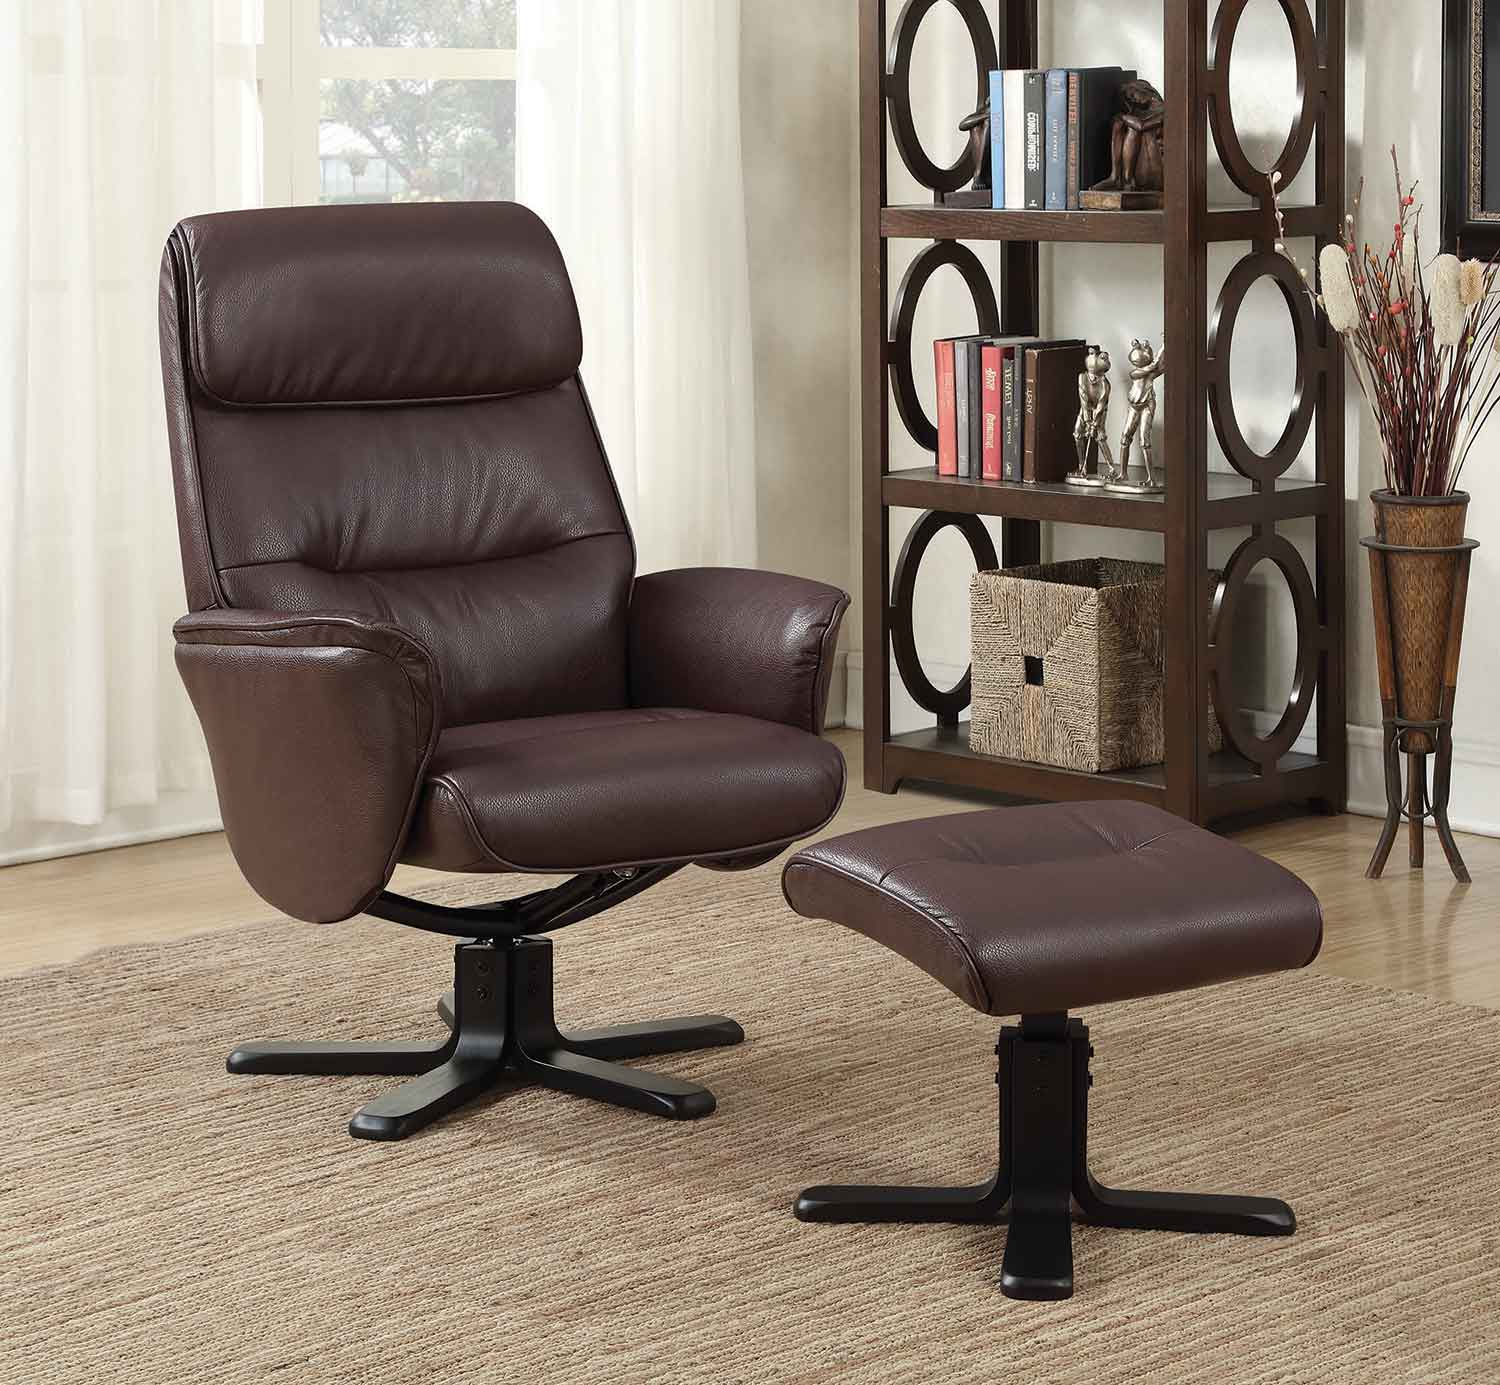 Coaster 600057 Glider Recliner with Ottoman - Brown 600057 at ...